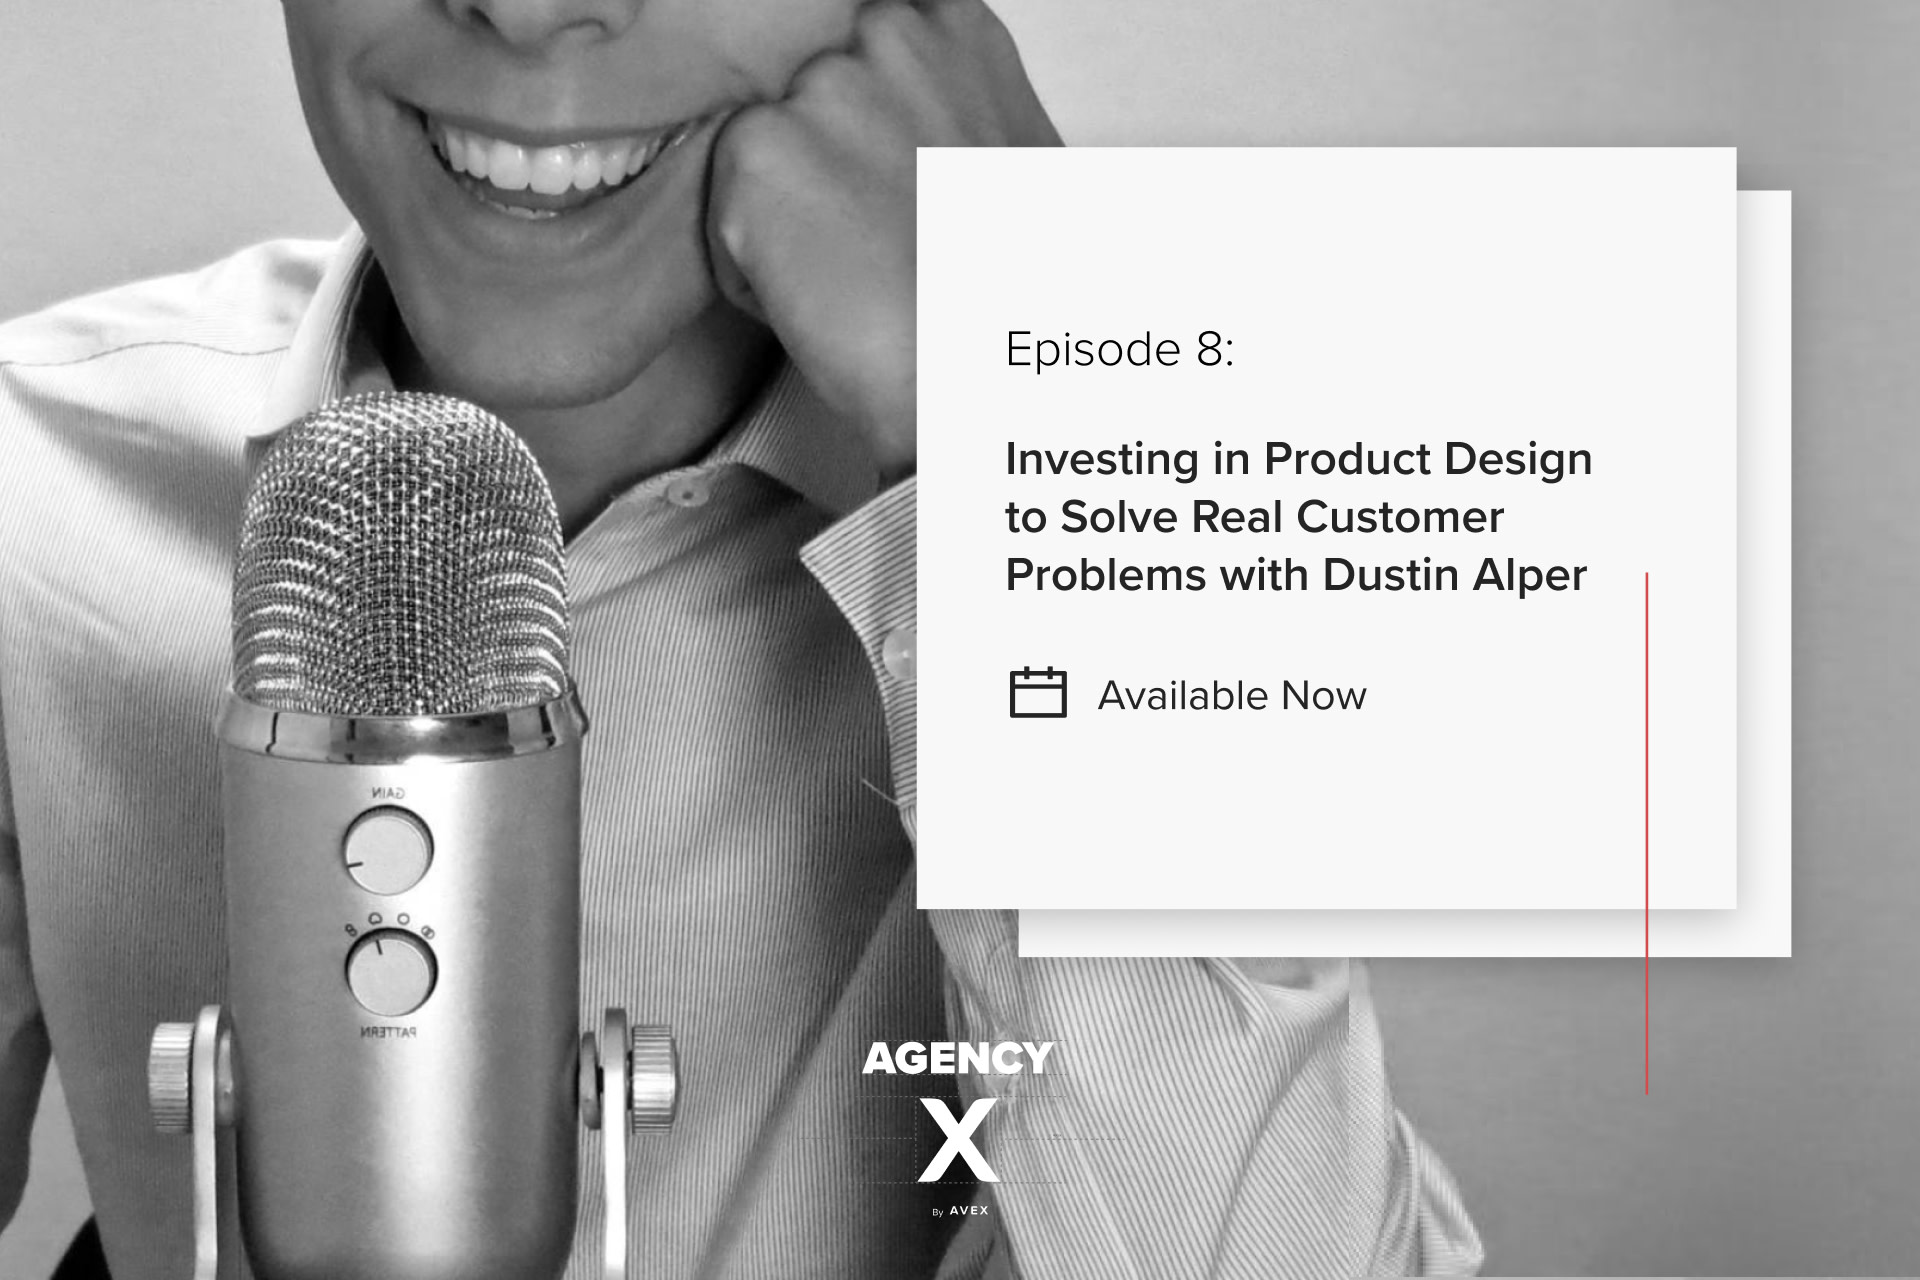 Investing in Product Design to Solve Real Customer Problems with Dustin Alper